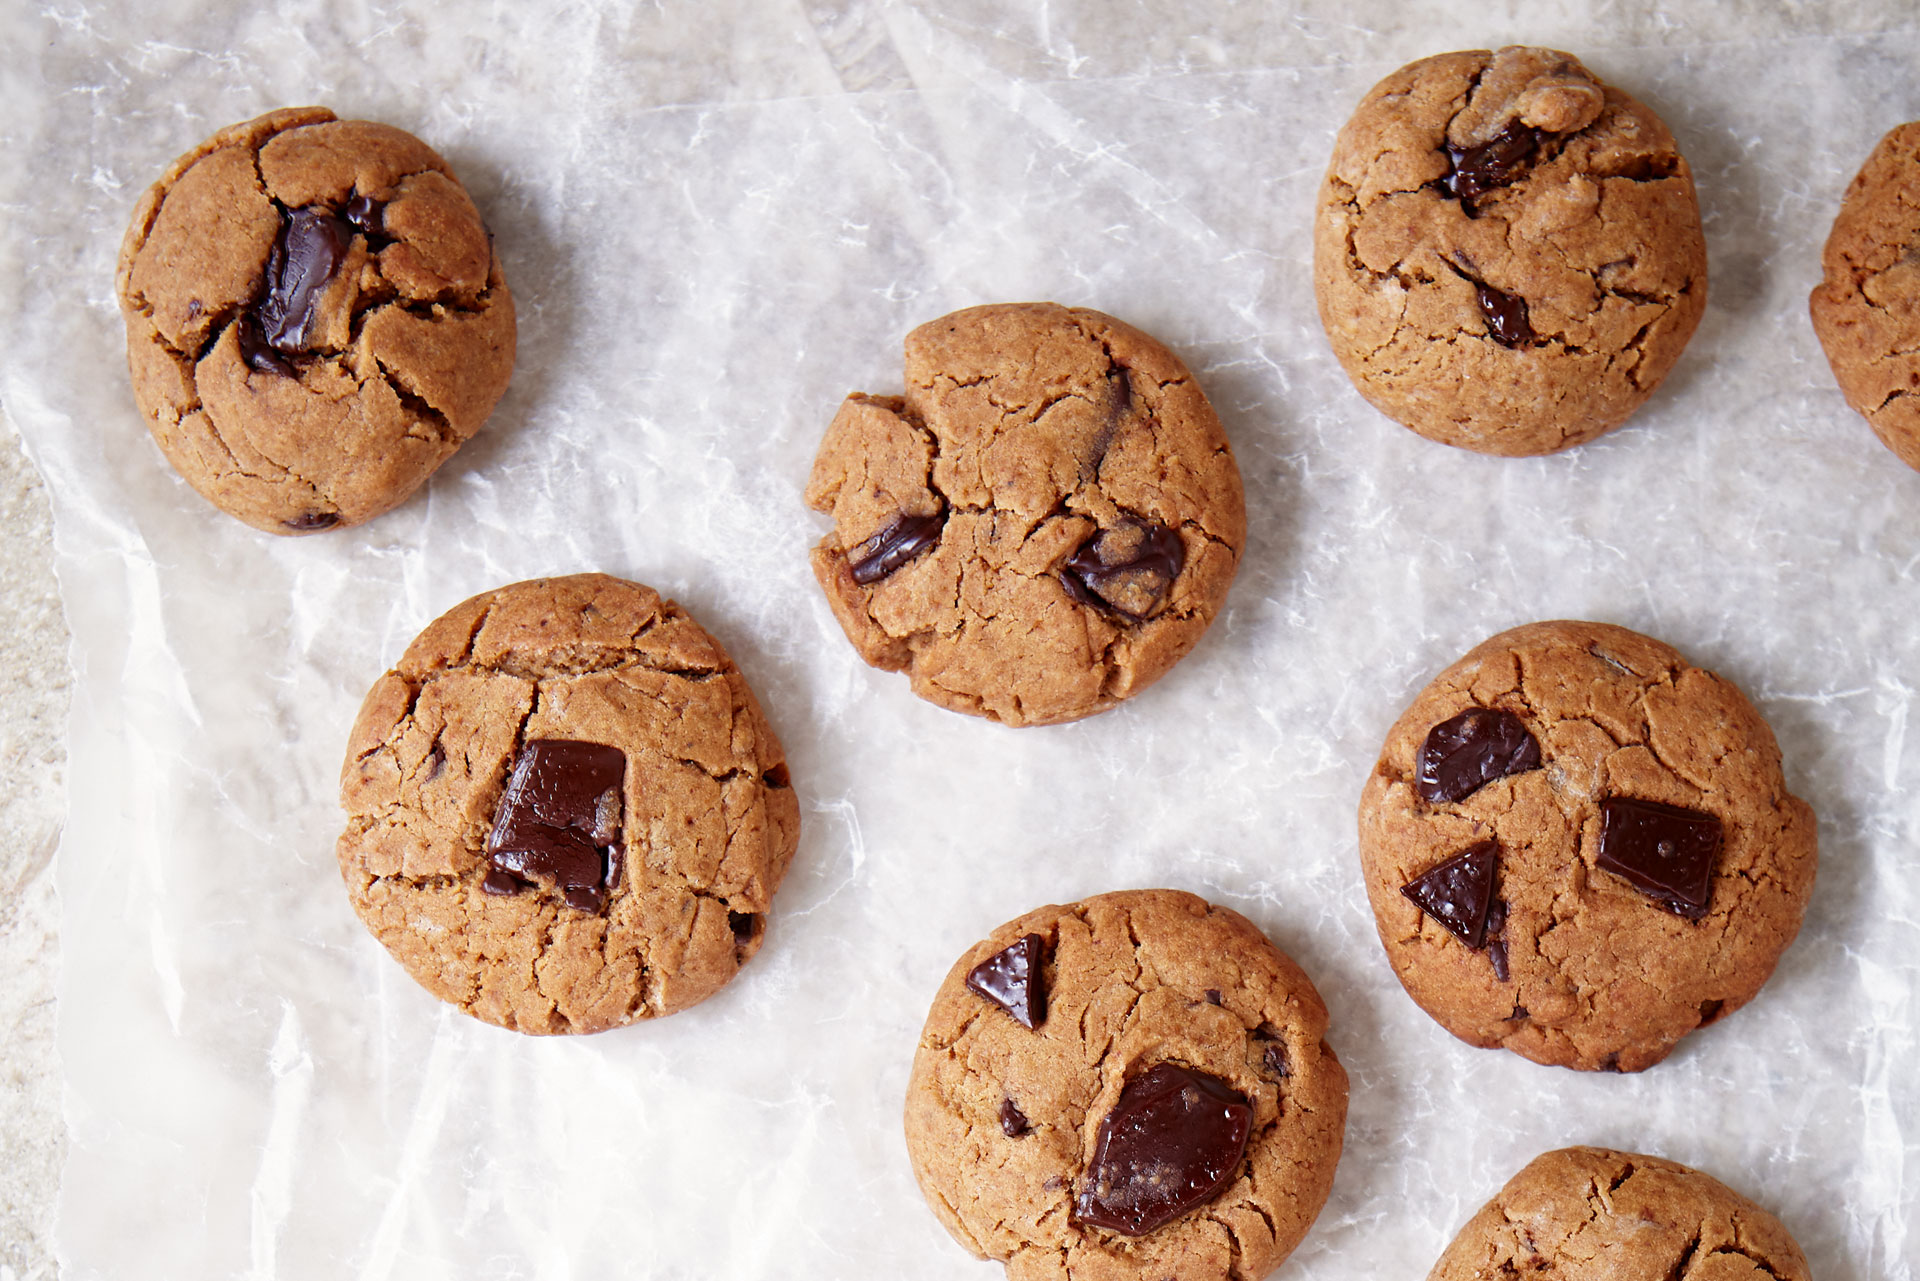 Recipe: Deliciously Ella's Nut Butter Chocolate Chip Cookies